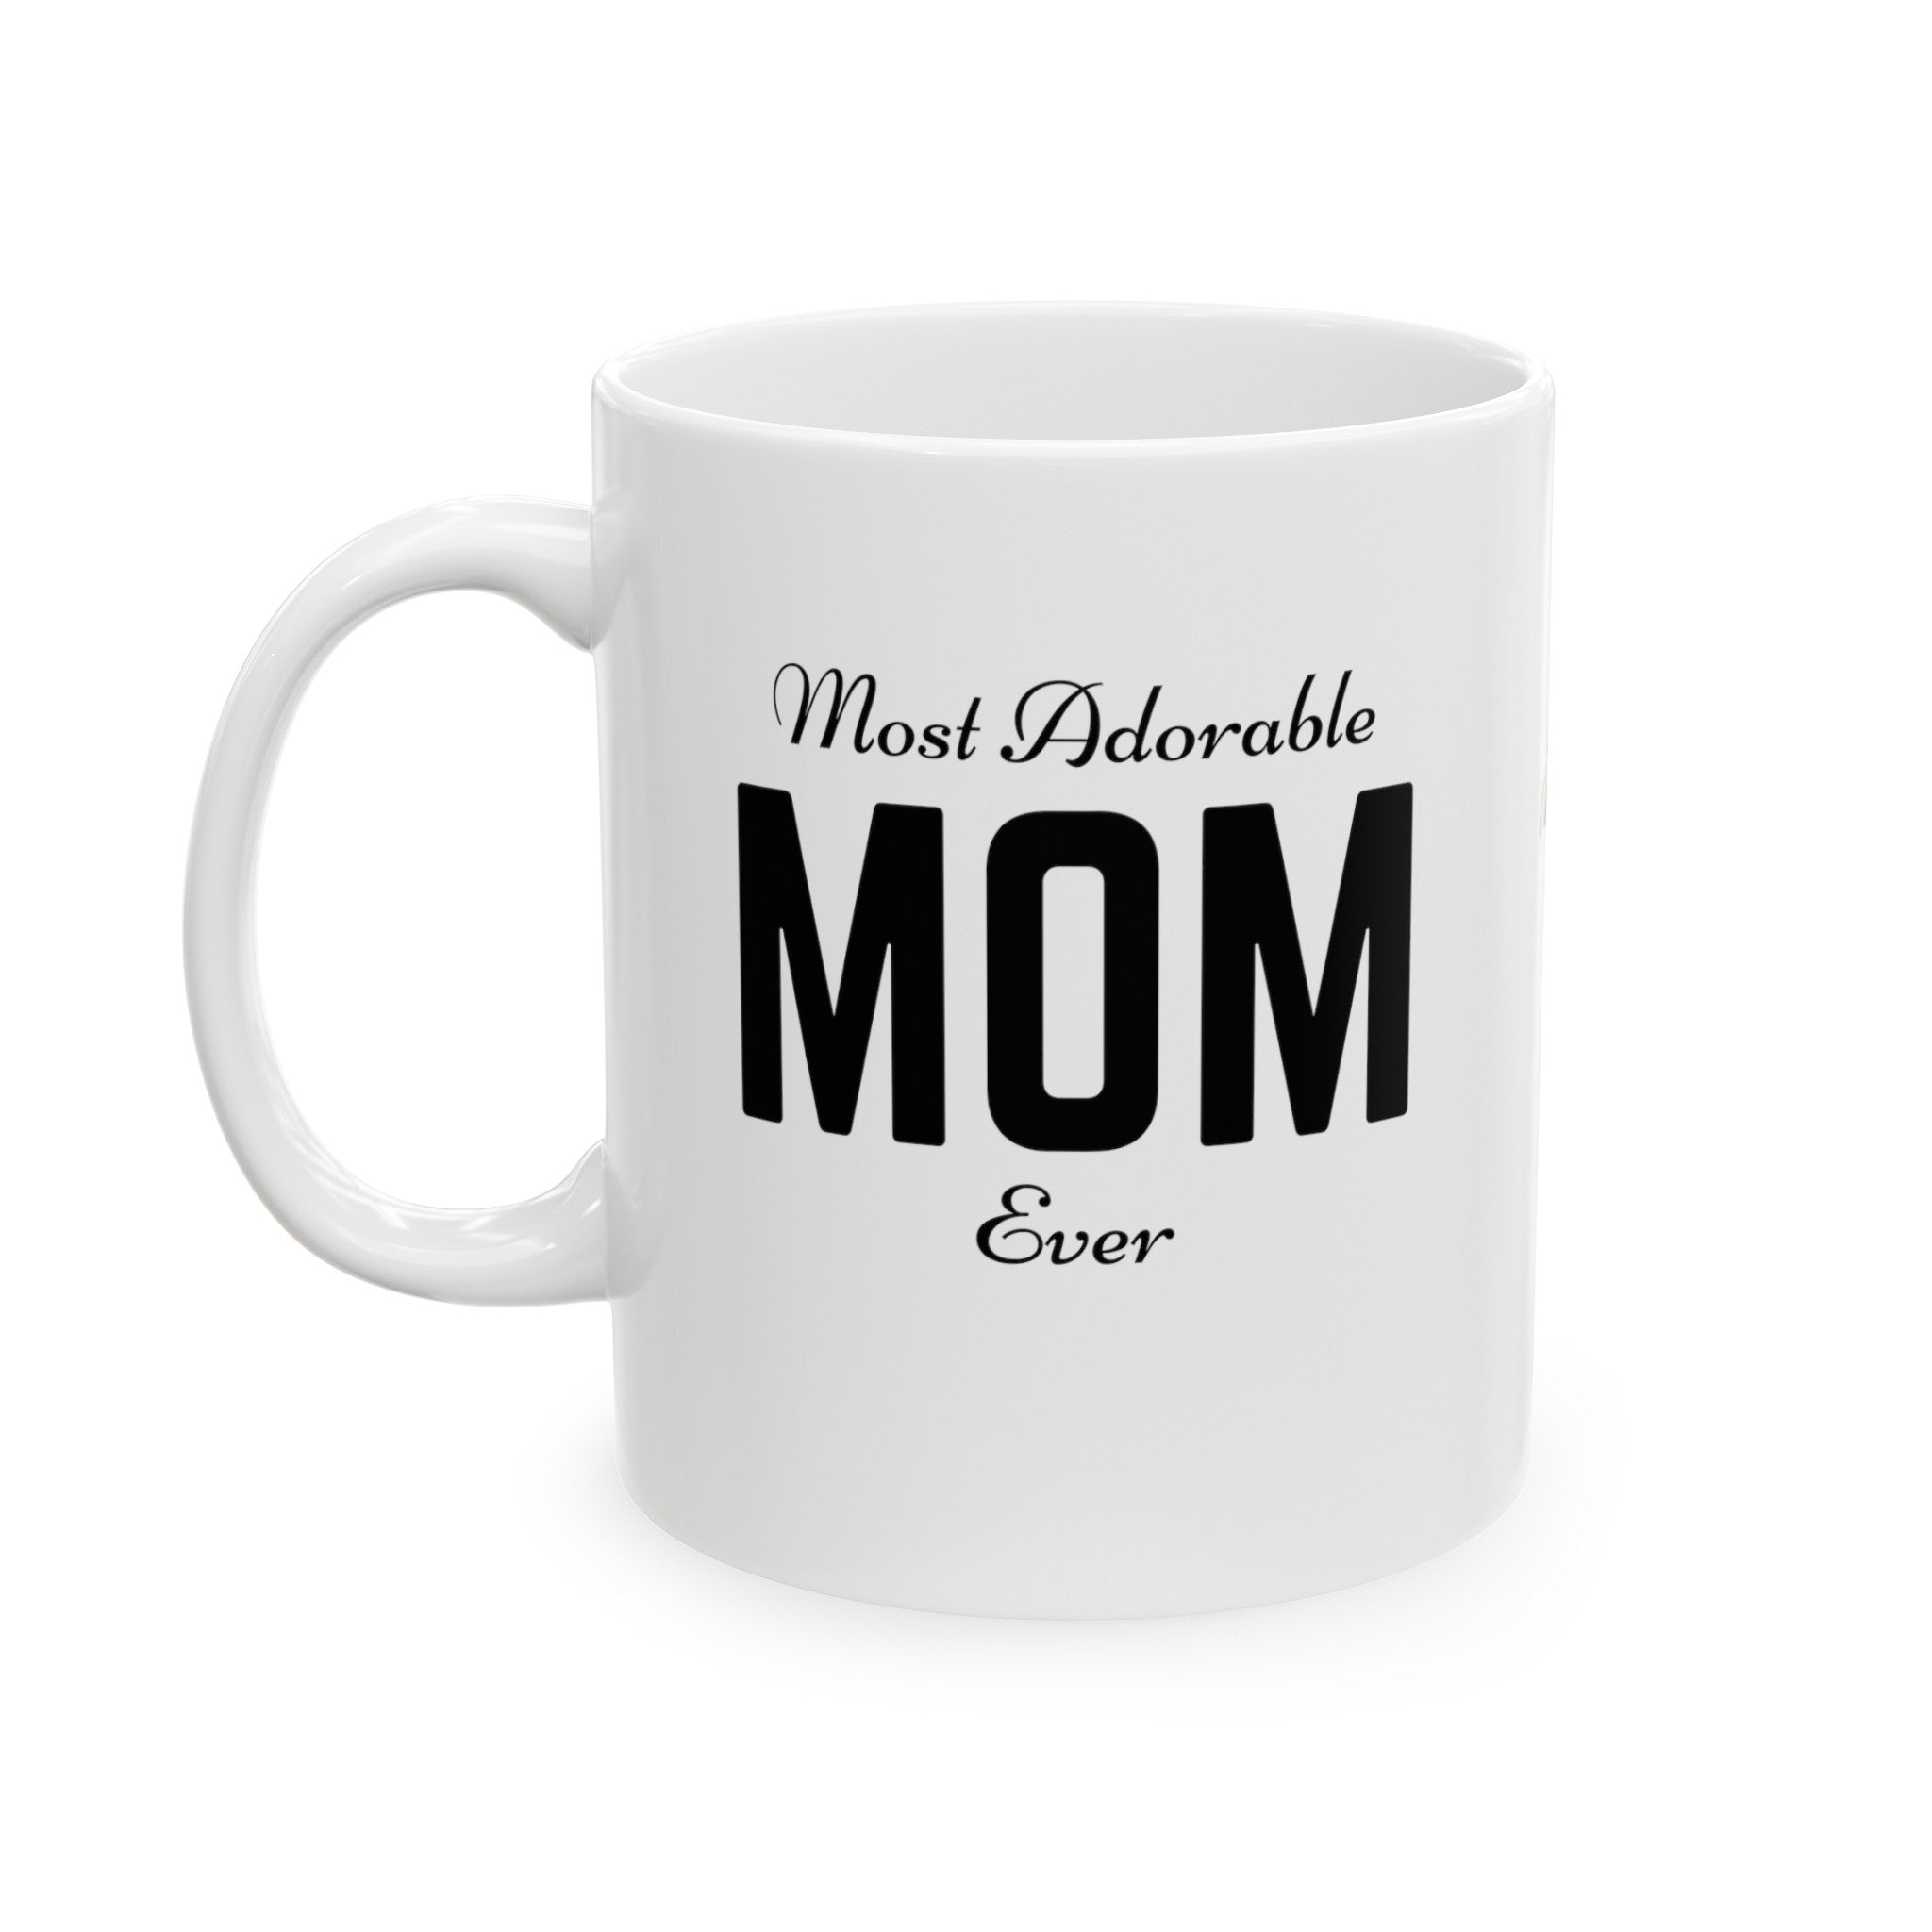 Mother's Day Gift Most Adorable Mom Ceramic Mug, (11oz, 15oz) with Flowers, Mother's Day Mug, Best Mother's Day Gift, Gift for Mom